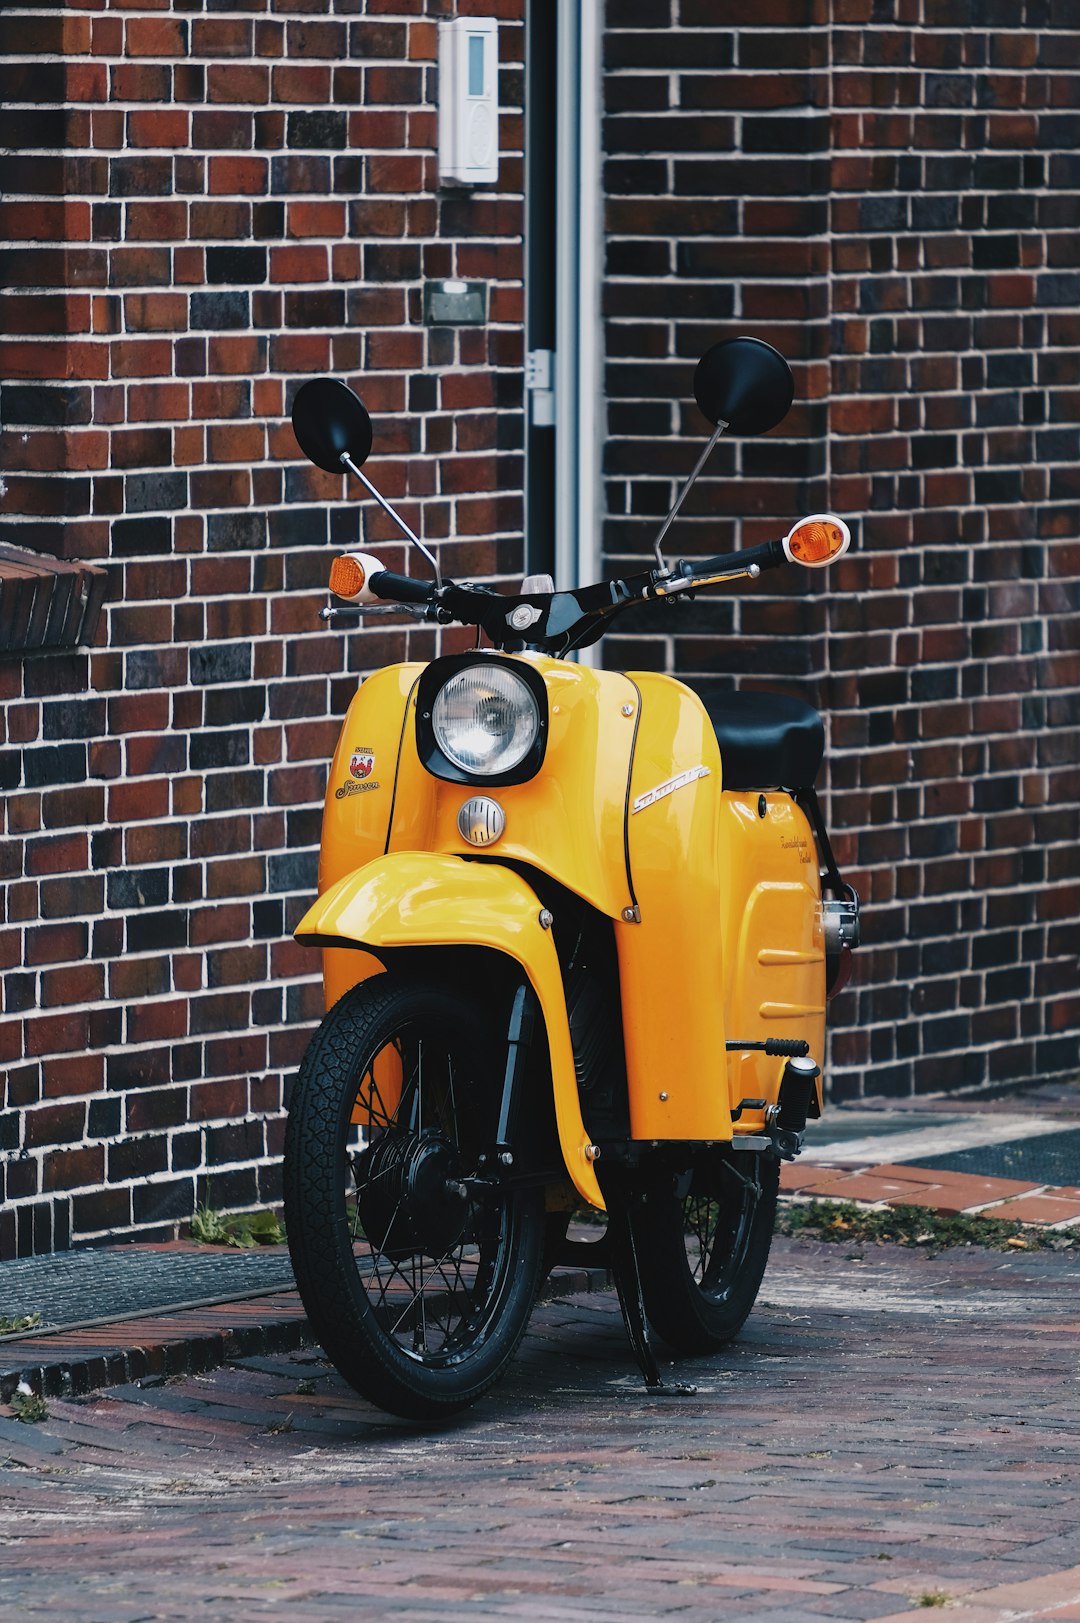 yellow and black motorcycle parked beside brown brick wall